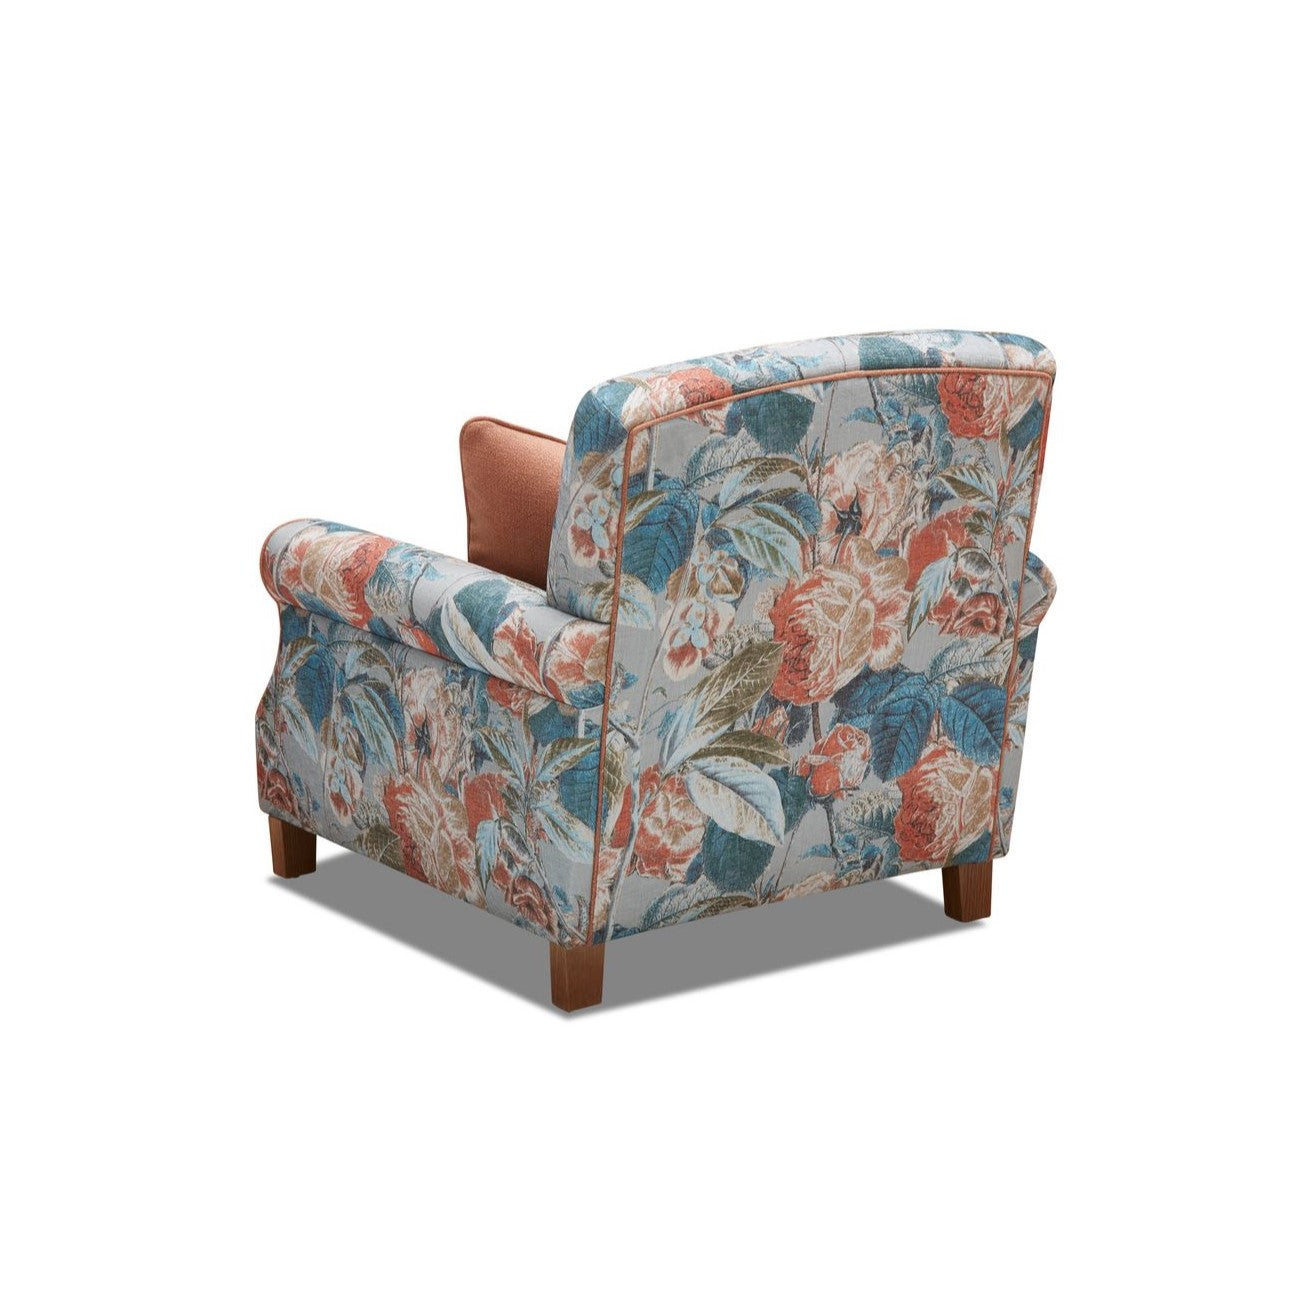 Purcell Occasional Chair by Molmic available from Make Your House A Home, Furniture Store located in Bendigo, Victoria. Australian Made in Melbourne.